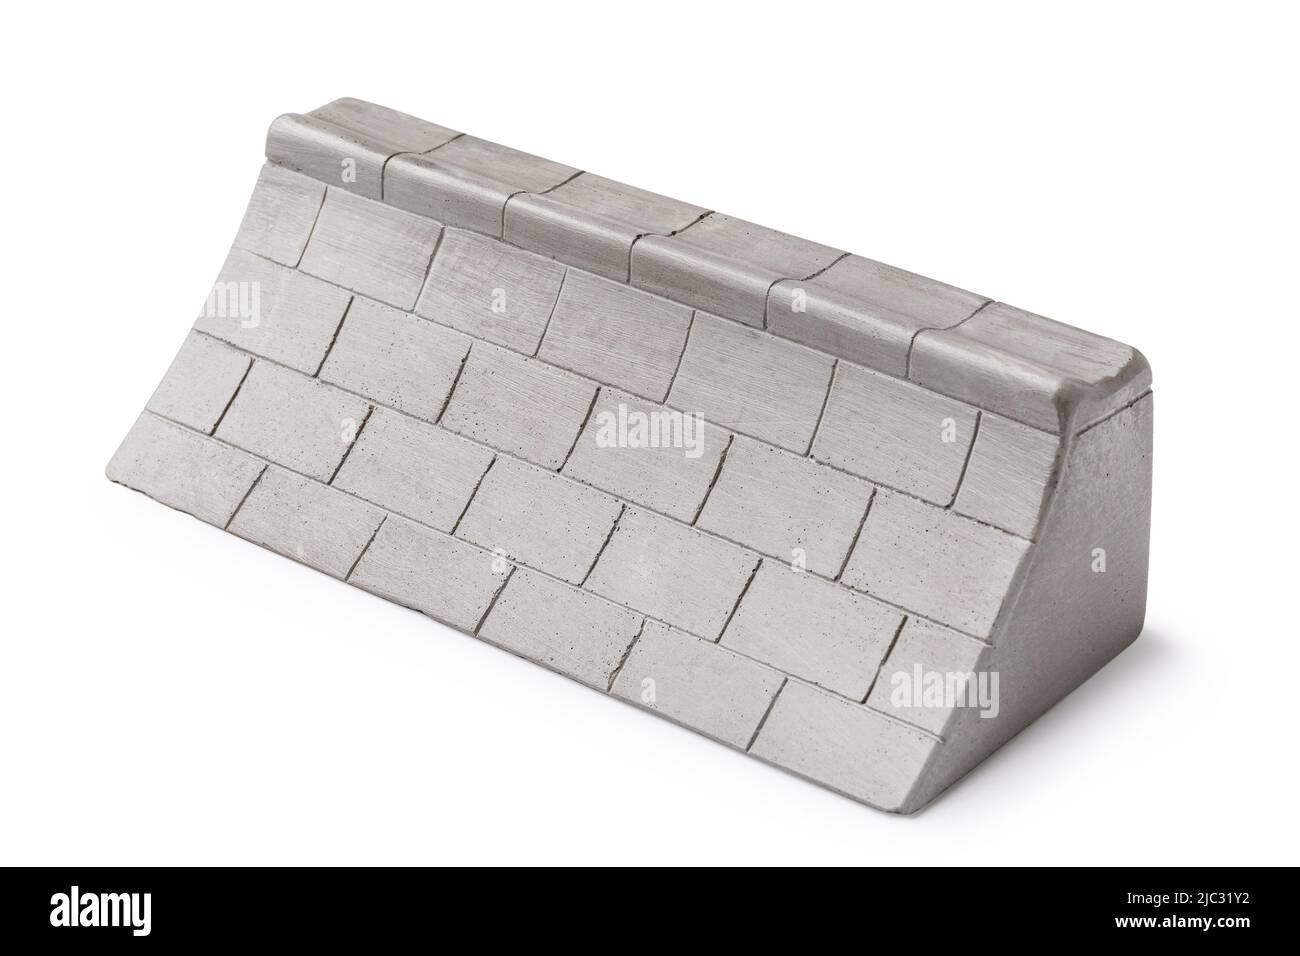 Gray plaster ramp for fingerboarding, imitating a wall, isolated on a white background Stock Photo